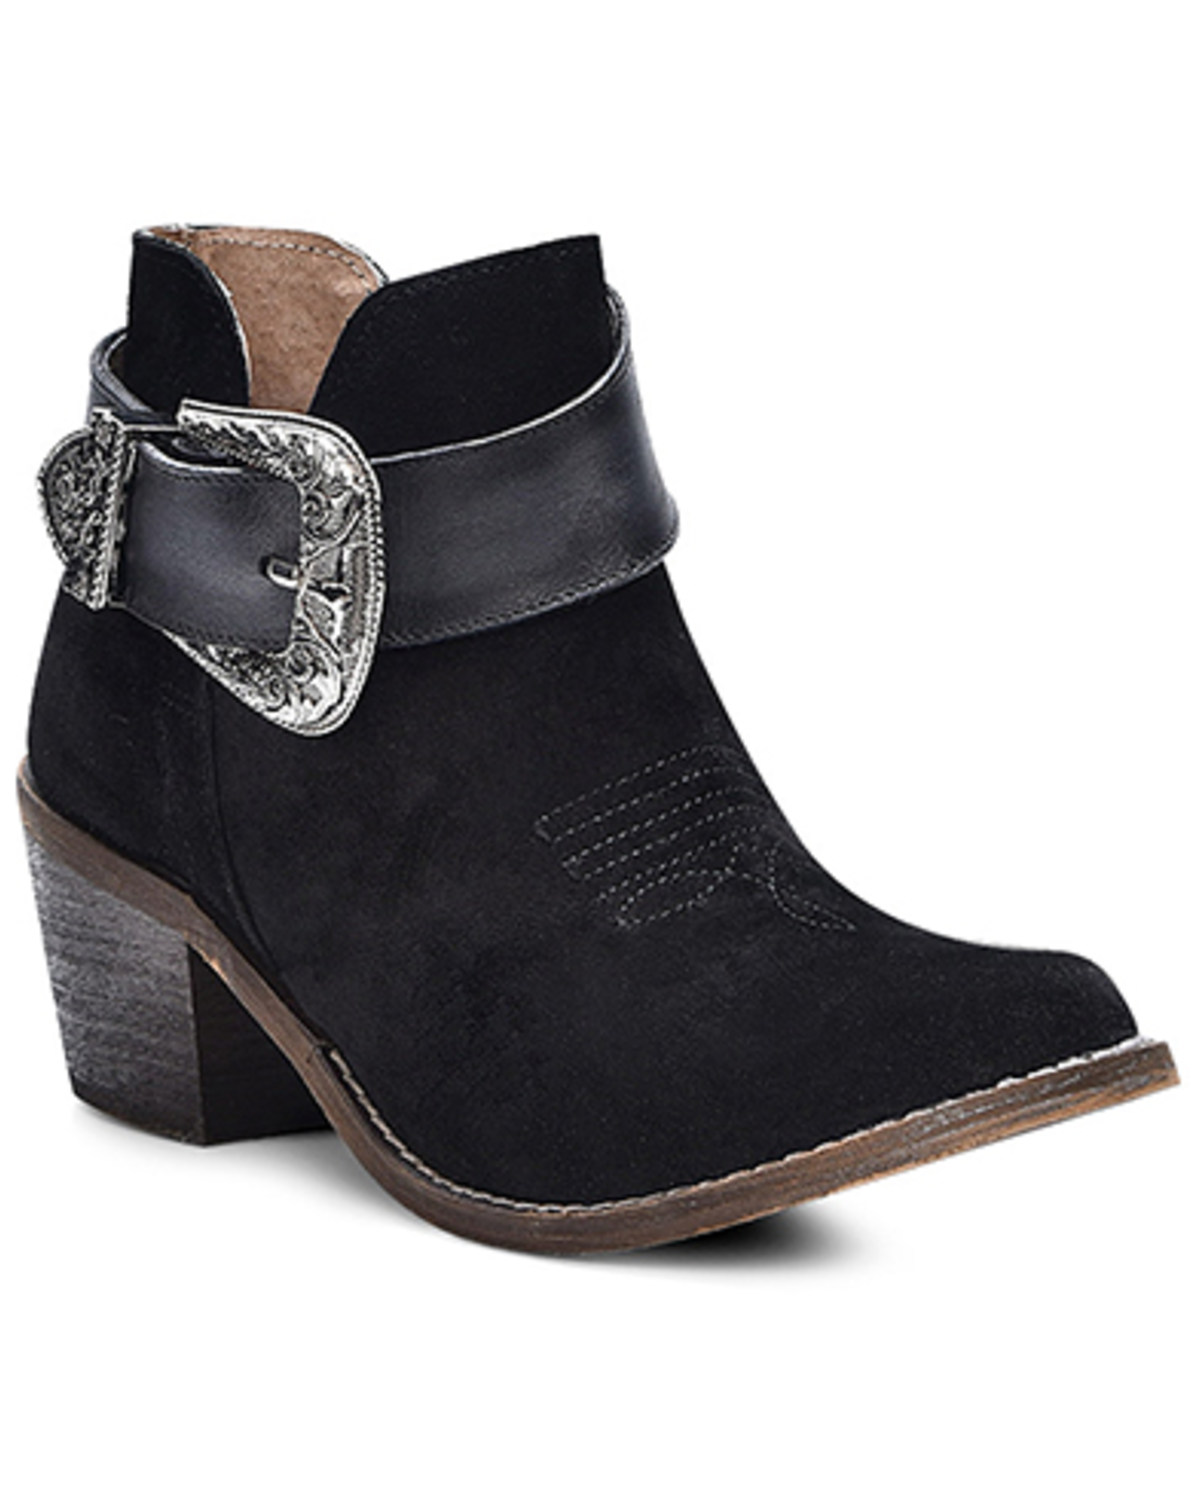 Corral Women's Buckle Ankle Booties - Pointed Toe